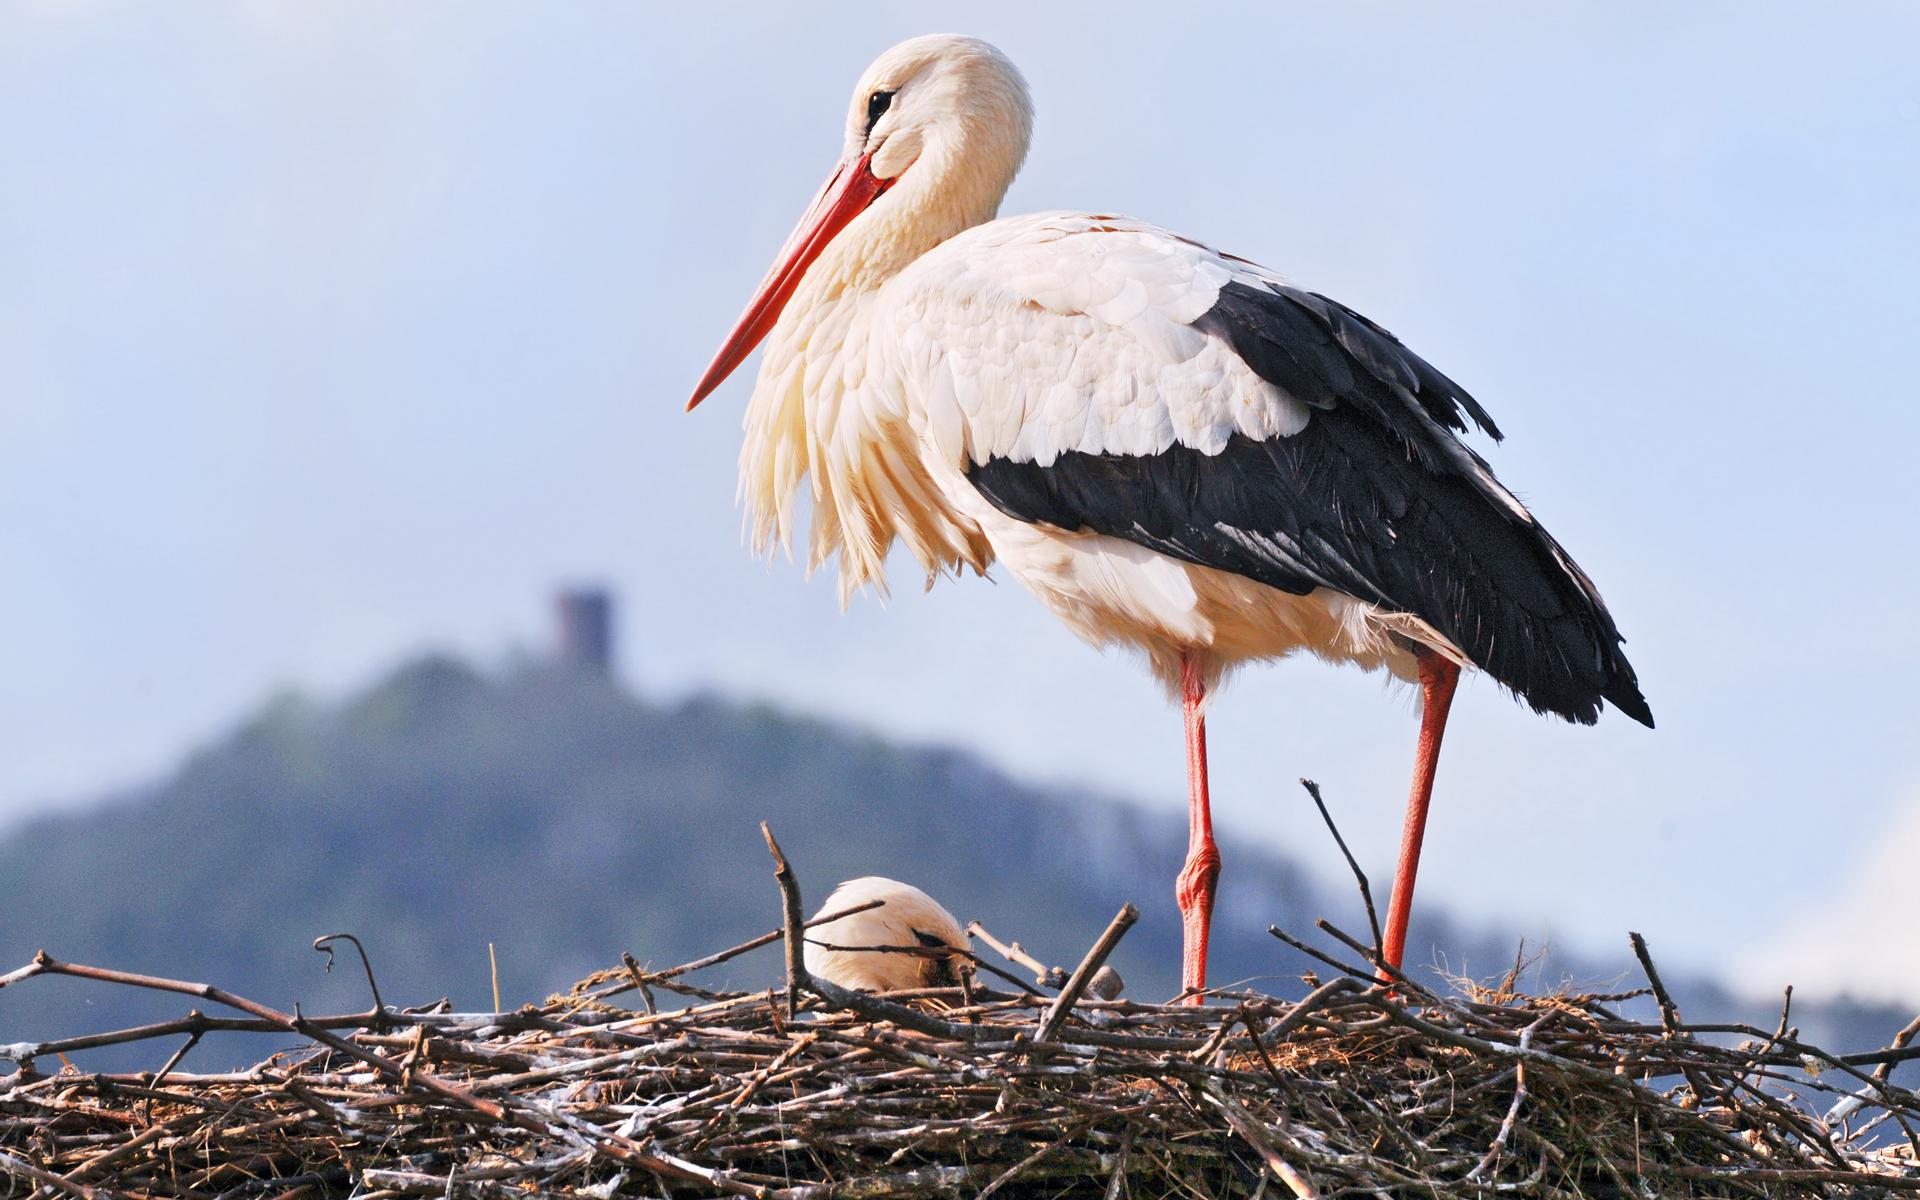 Stork Pictures